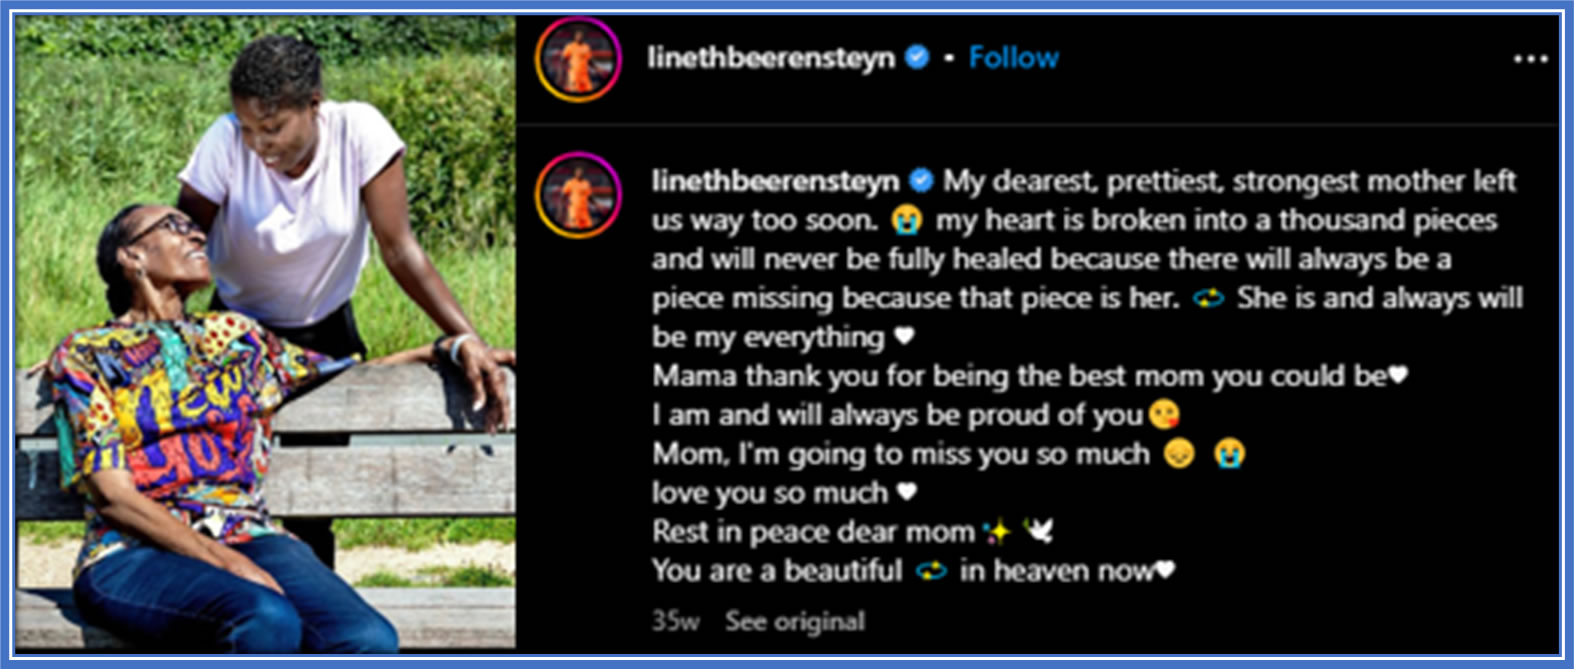 The athlete wrote a heart-touching attribute for her beloved mother. Source: Instagram.